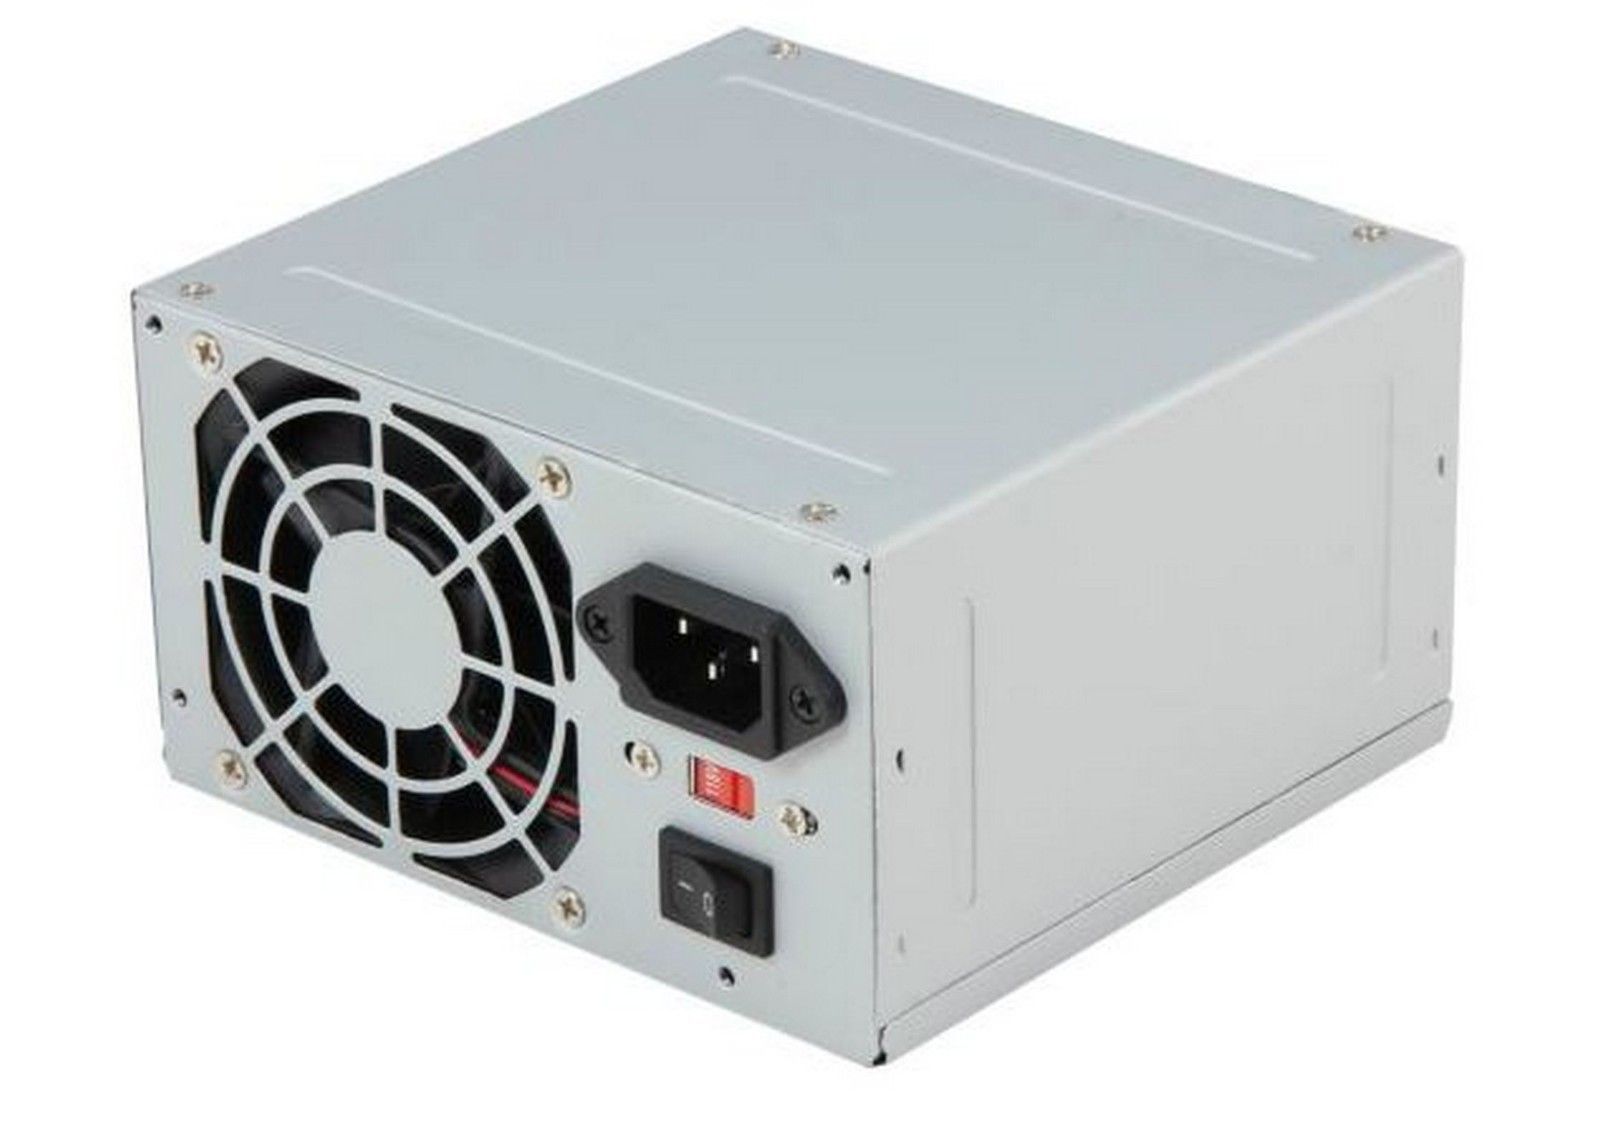 New PC Power Supply Upgrade for Dell XW604 Slimline SFF Computer - $49.49